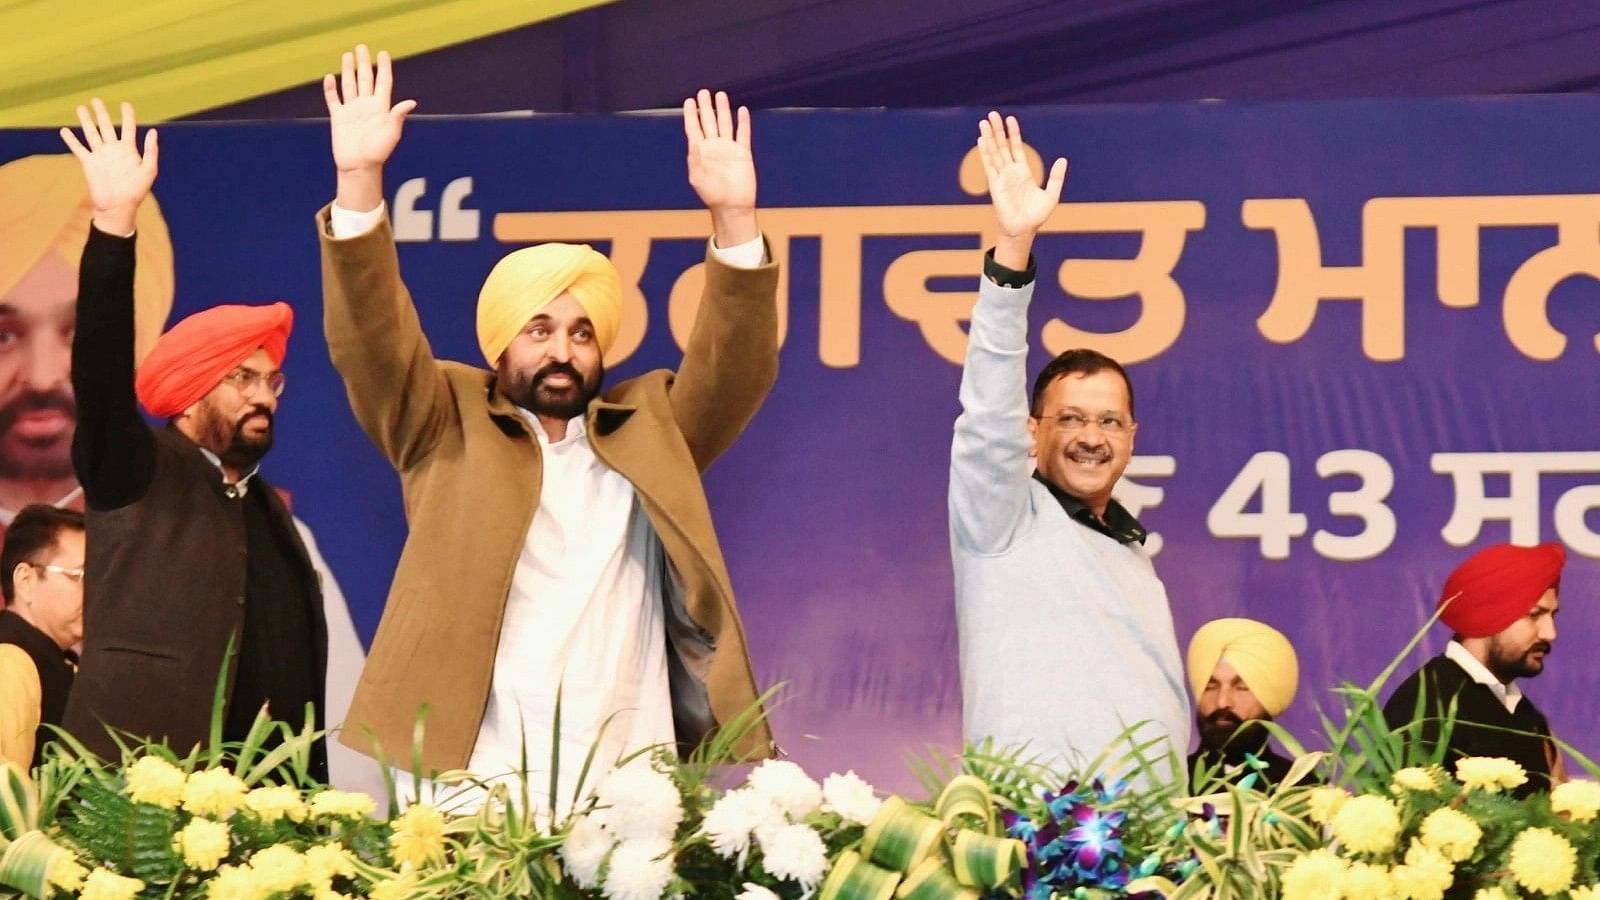 <div class="paragraphs"><p>Punjab CM Bhagwant Mann launched a citizen-centric model in the presence of Delhi Chief Minister Arvind Kejriwal, aiming to replicate this model across the country.</p></div>